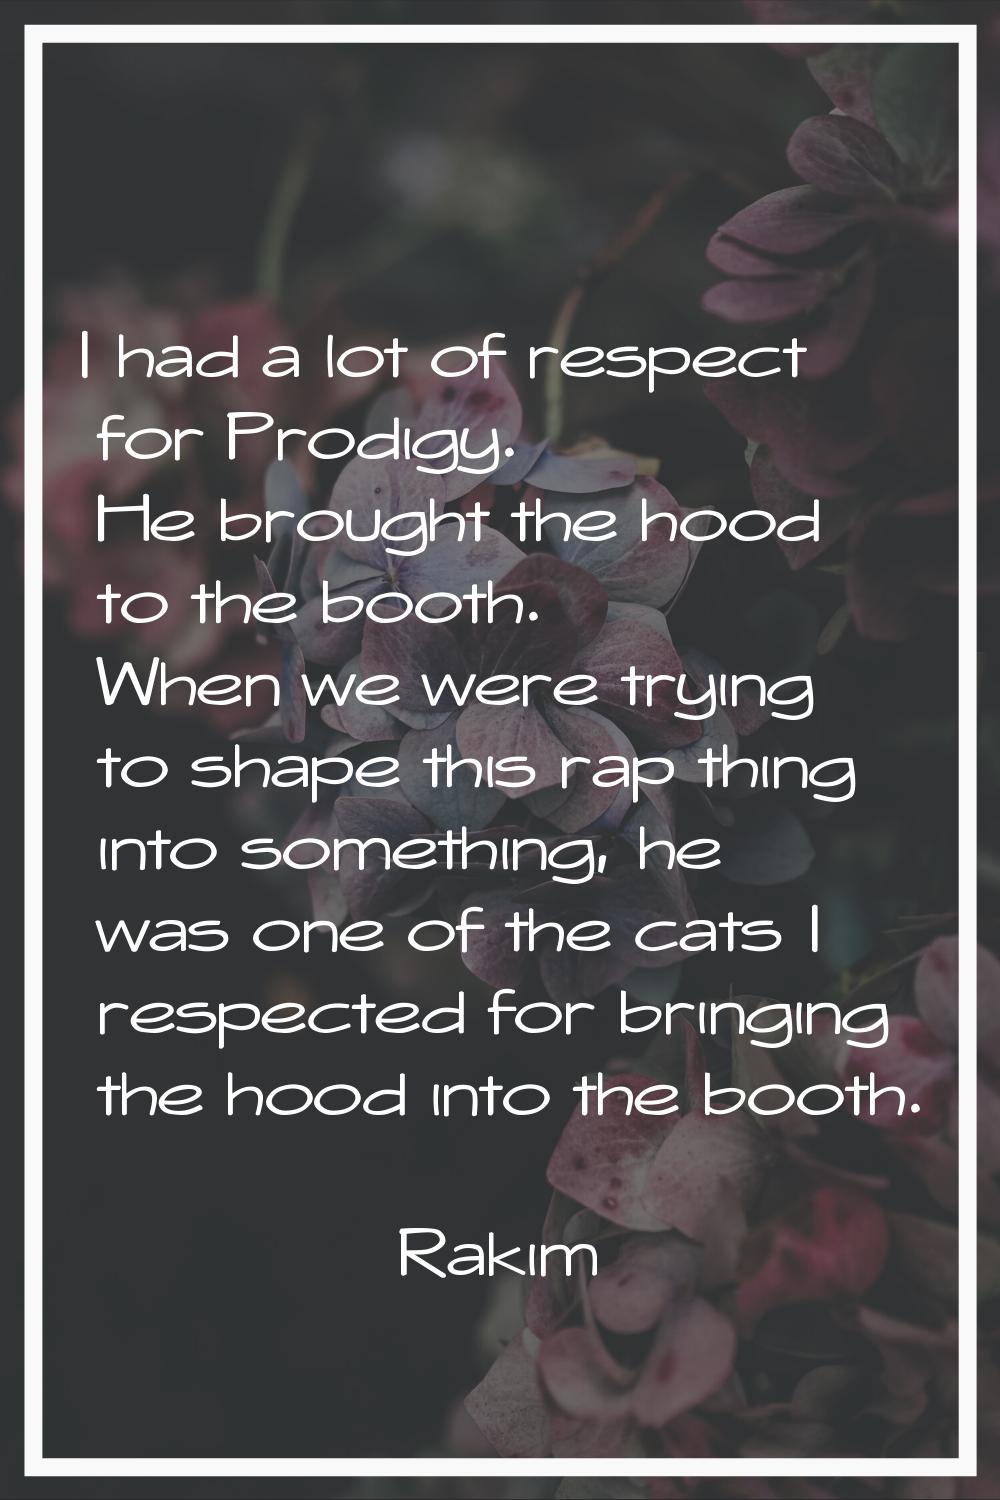 I had a lot of respect for Prodigy. He brought the hood to the booth. When we were trying to shape 